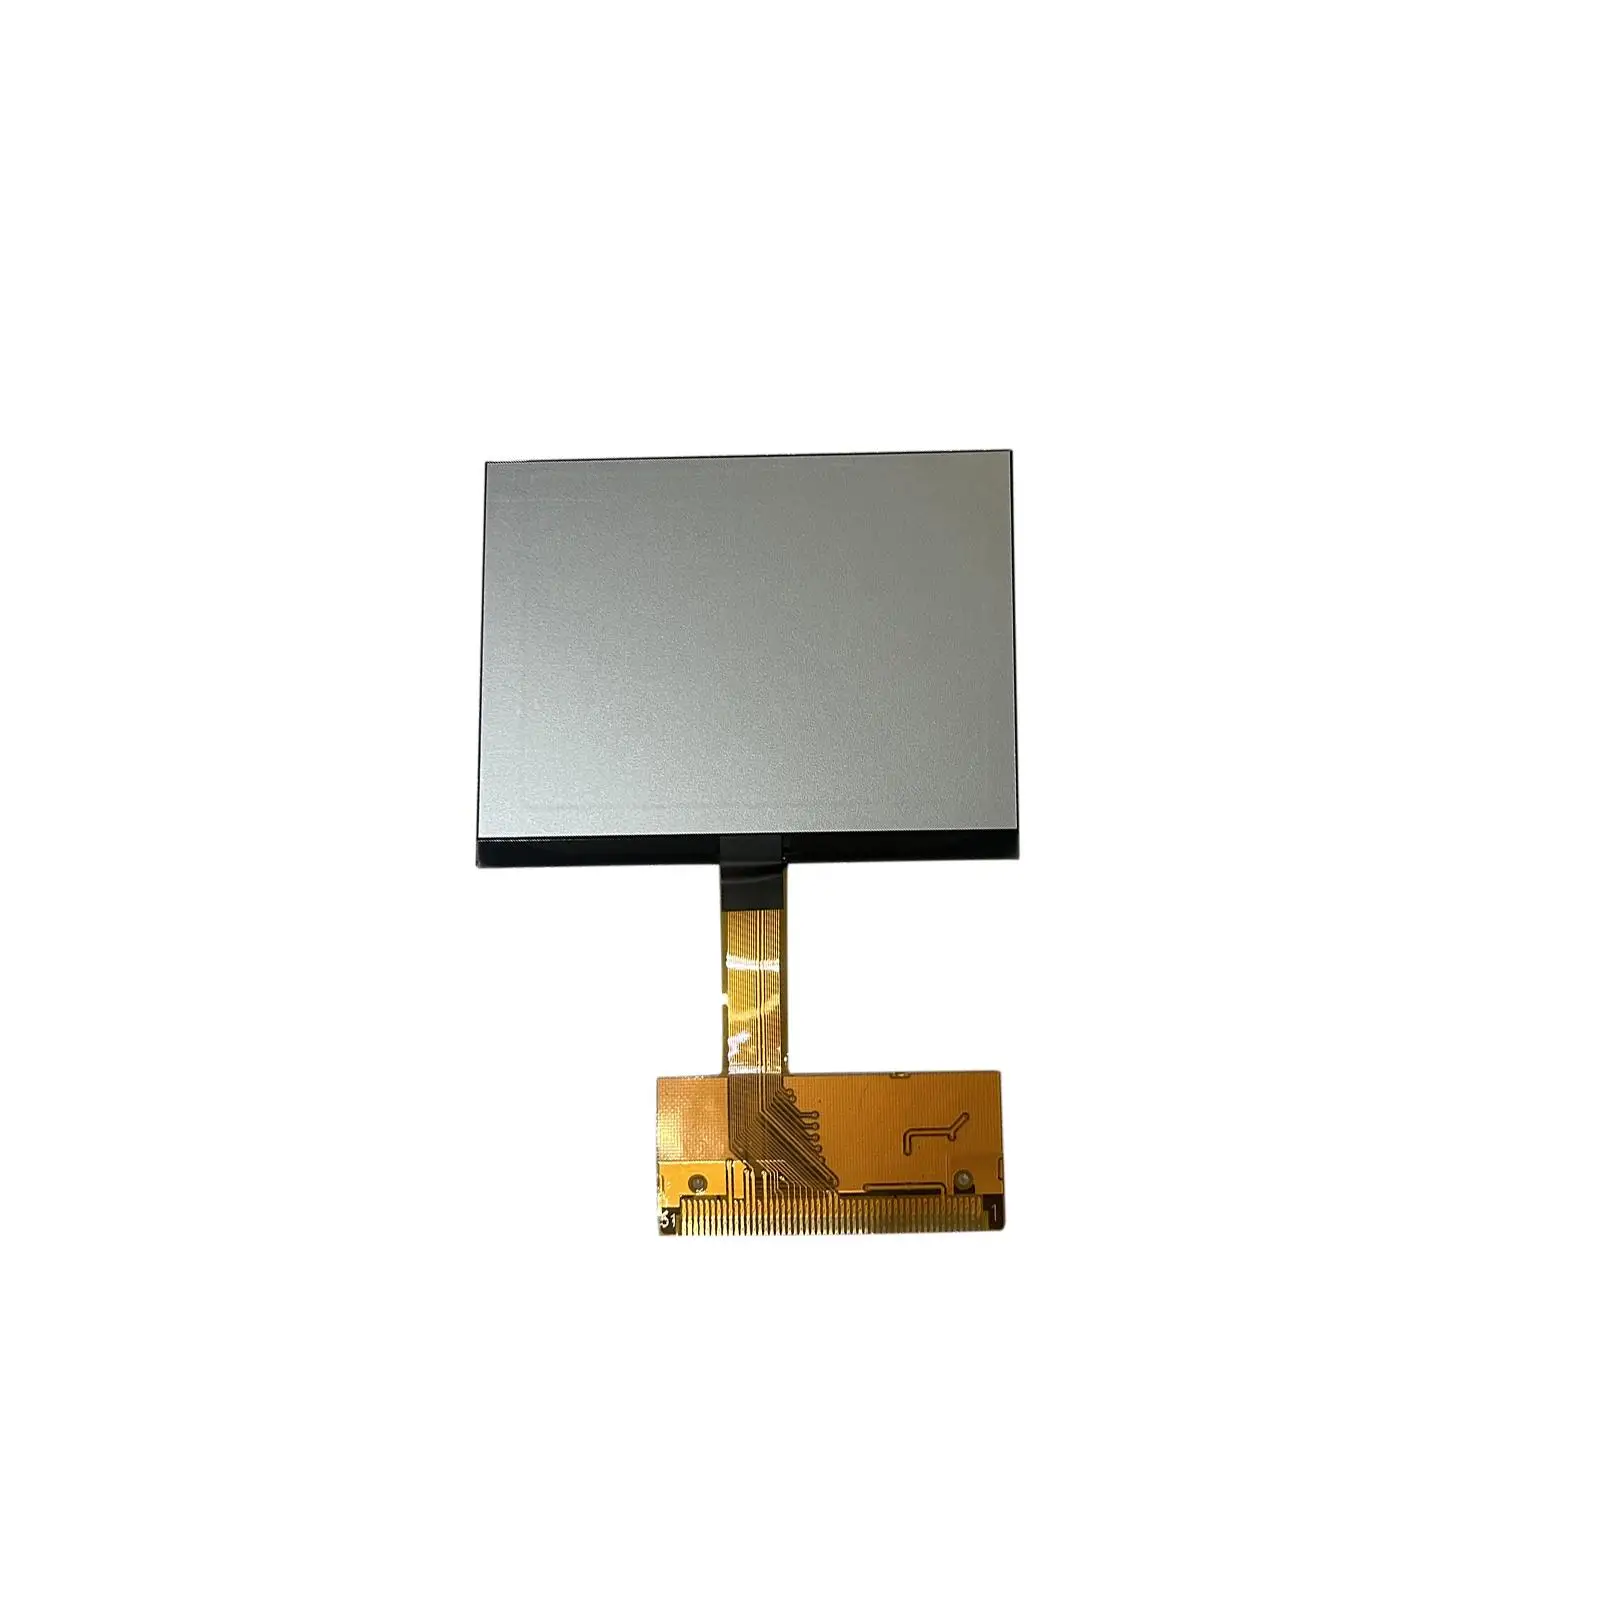 LCD Display Screen Replacements Spare Parts Professional for A3 A4 Pixel